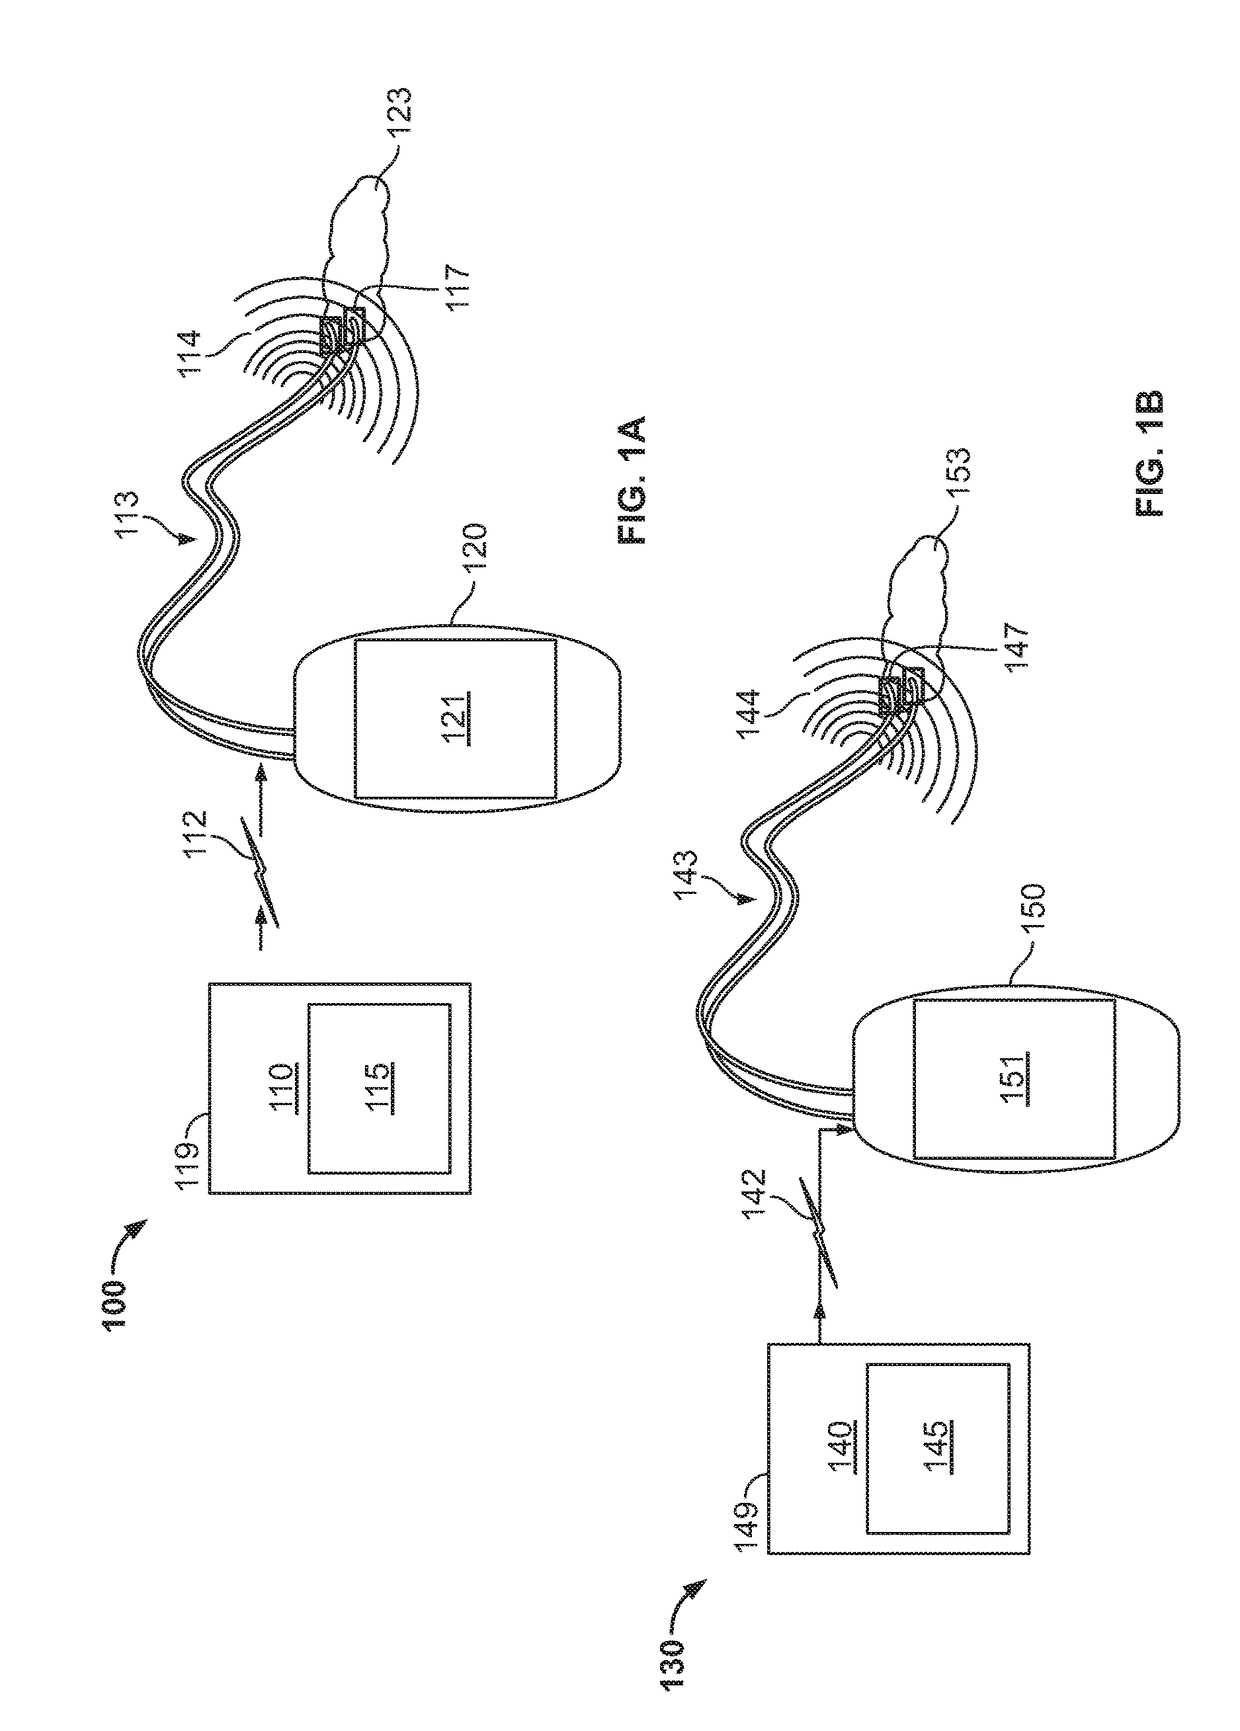 Stimulation devices and methods